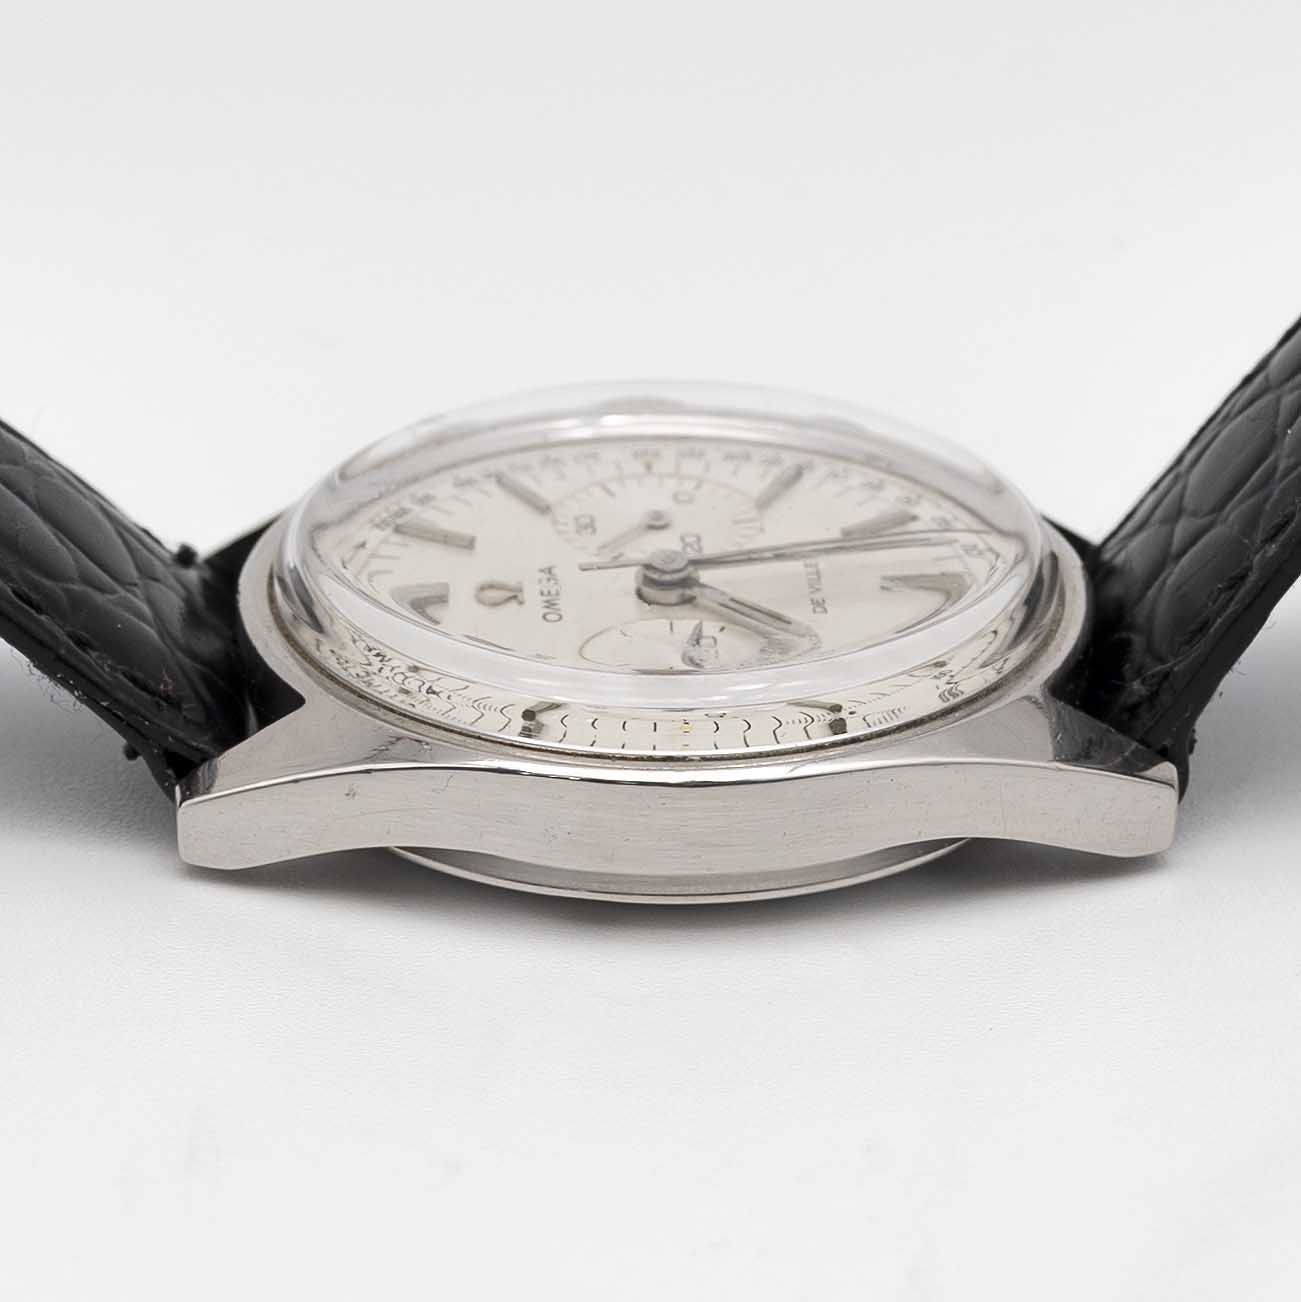 A GENTLEMAN'S STAINLESS STEEL OMEGA DE VILLE CHRONOGRAPH WRIST WATCH CIRCA 1969, REF. 145.017 WITH - Image 9 of 9